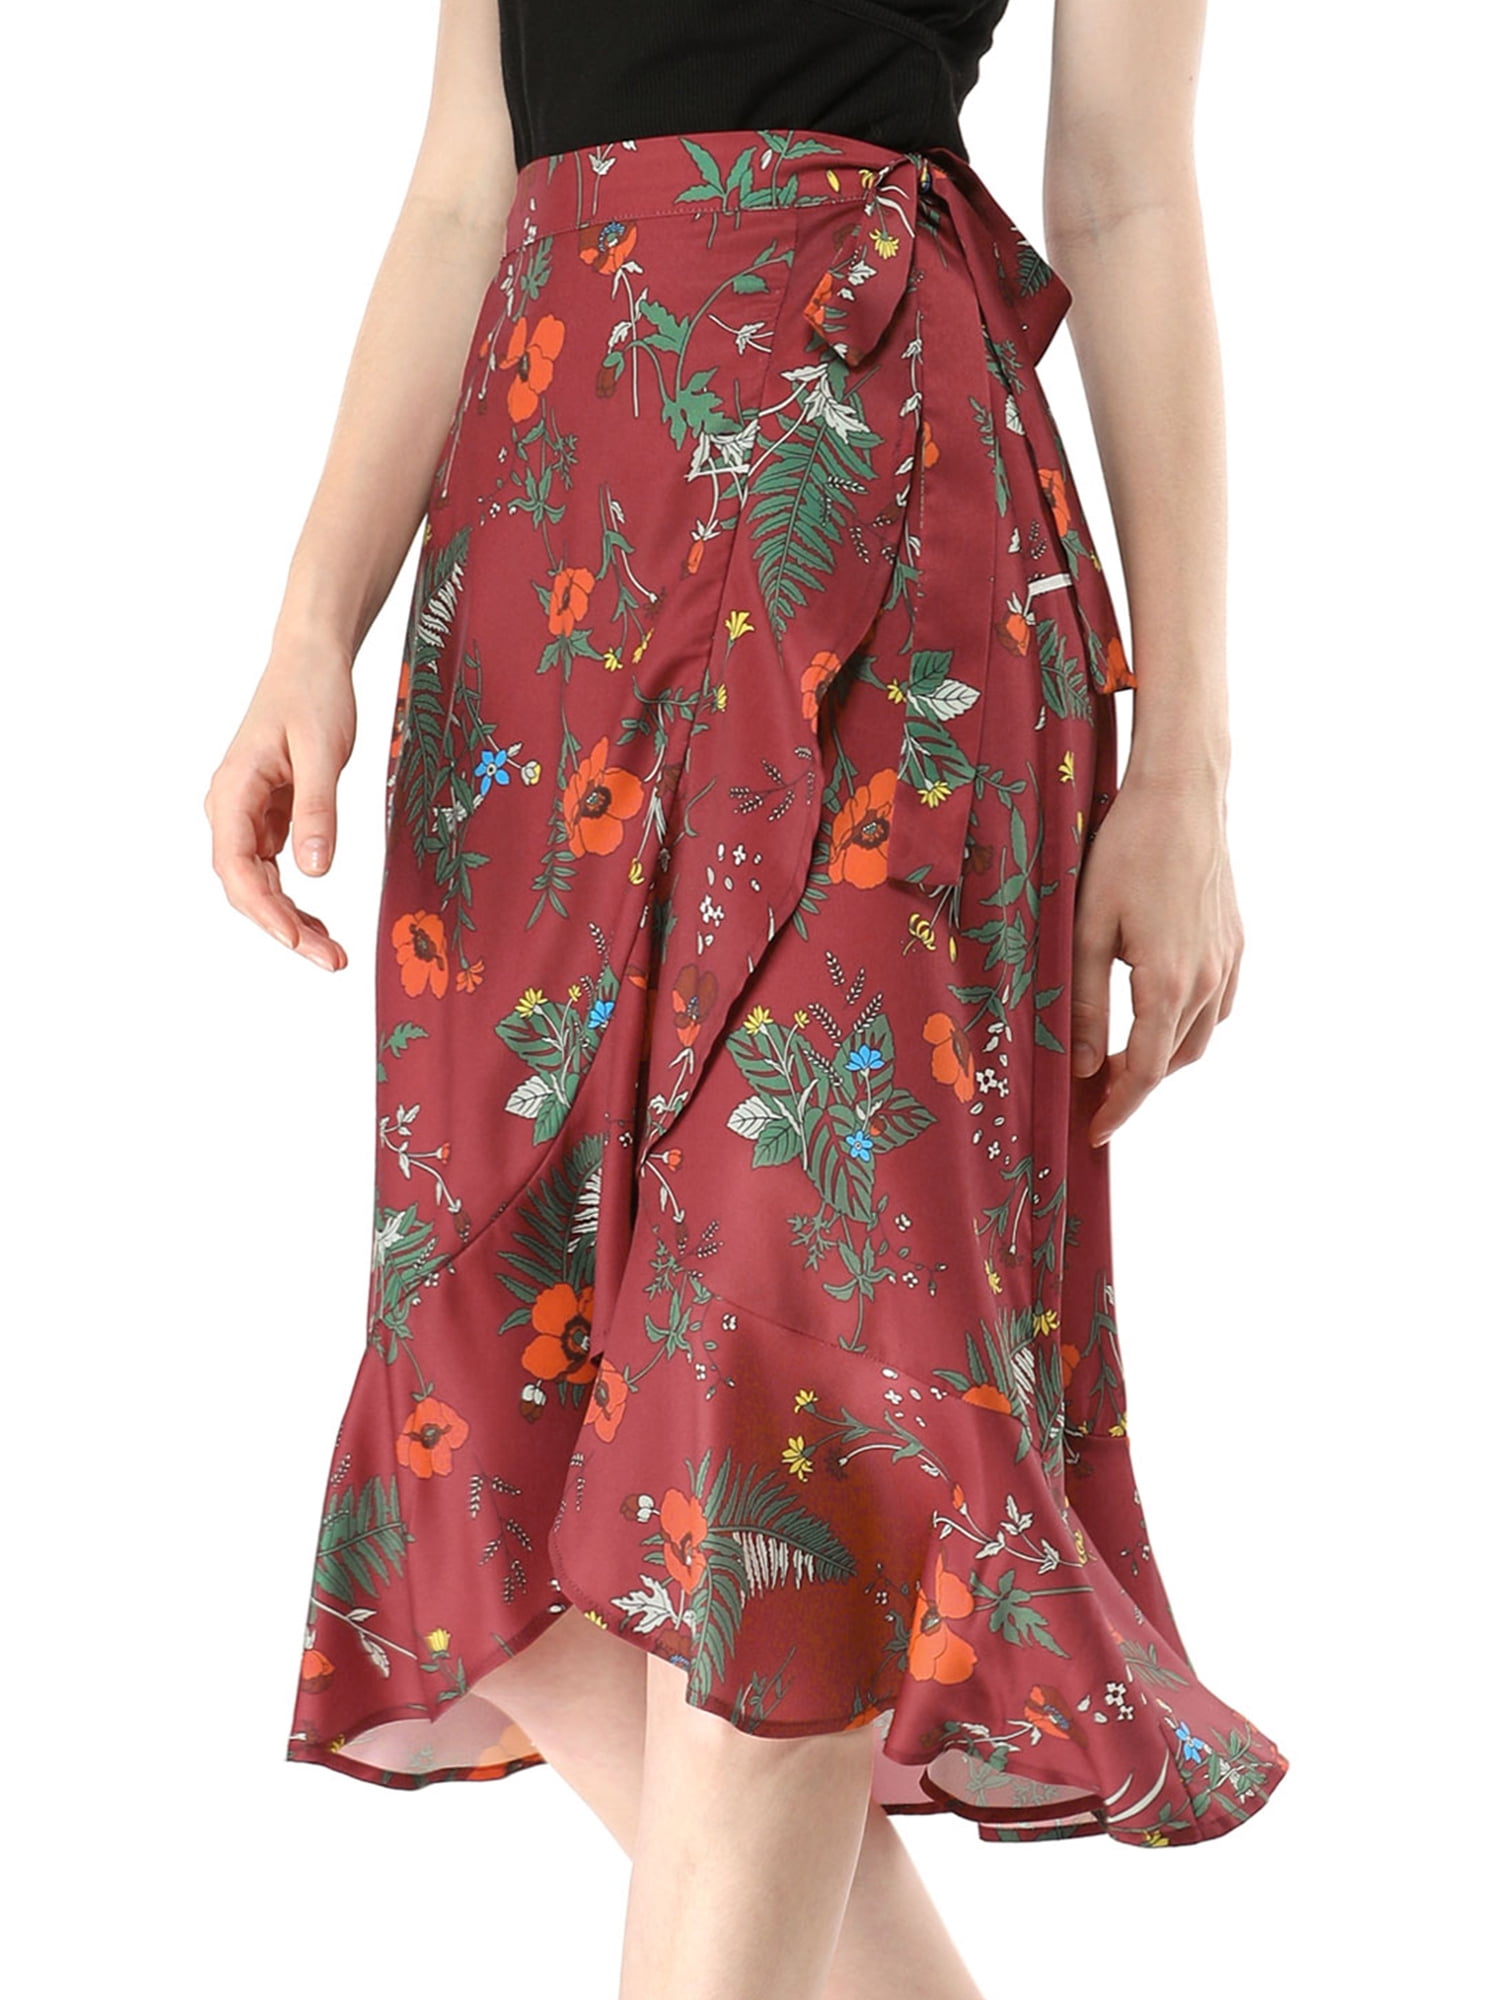 Women S Summer Boho Skirts Ruffle Flare Tie Waist High Low Floral Wrap Skirt Size M 10 Red